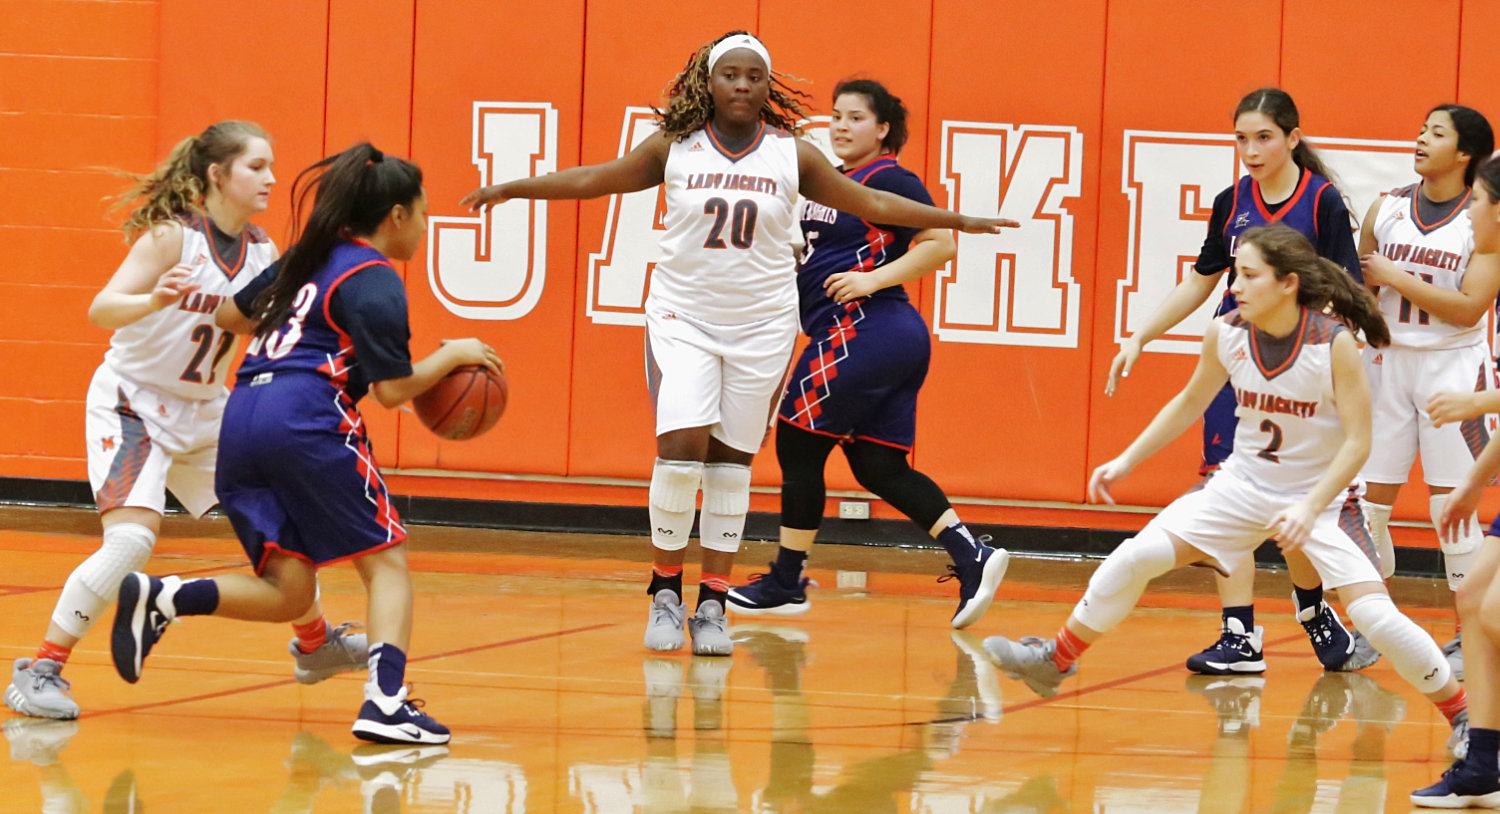 The Lady Jacket defense will be tested in upcoming playoff action.